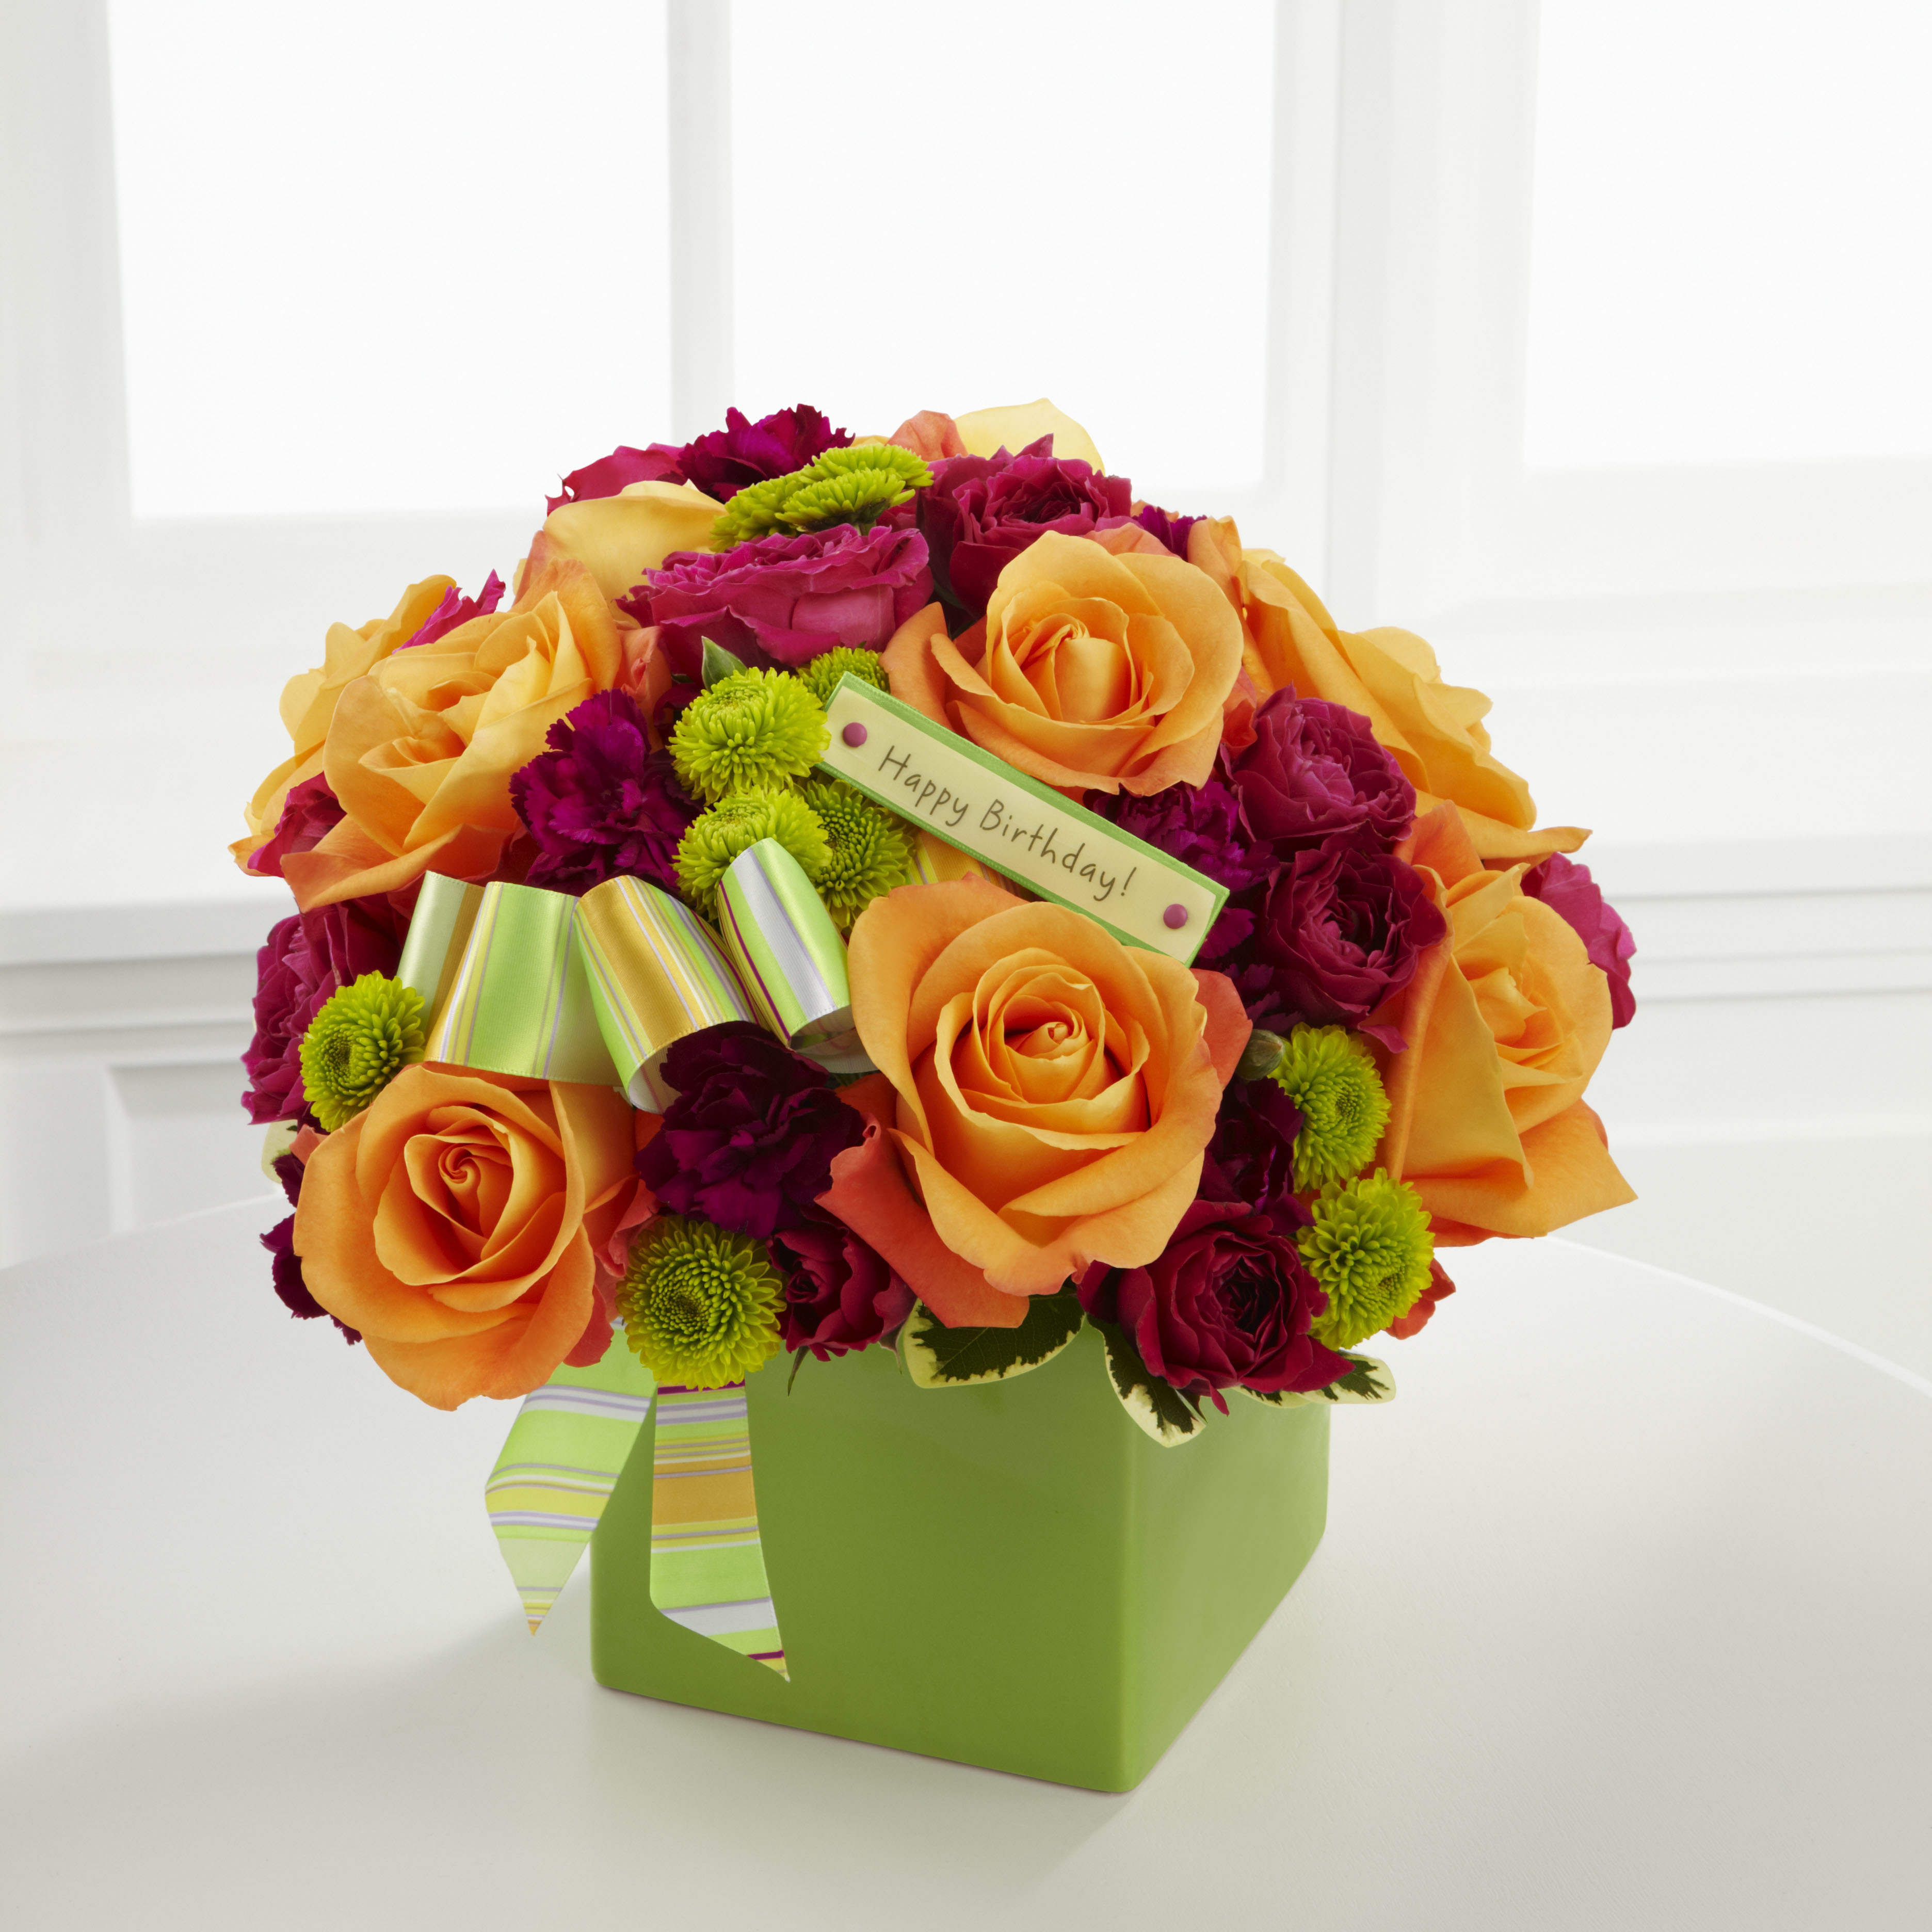 The FTD® Birthday Bouquet by Tognoli Gifts | Fresh Flowers & Gift ...